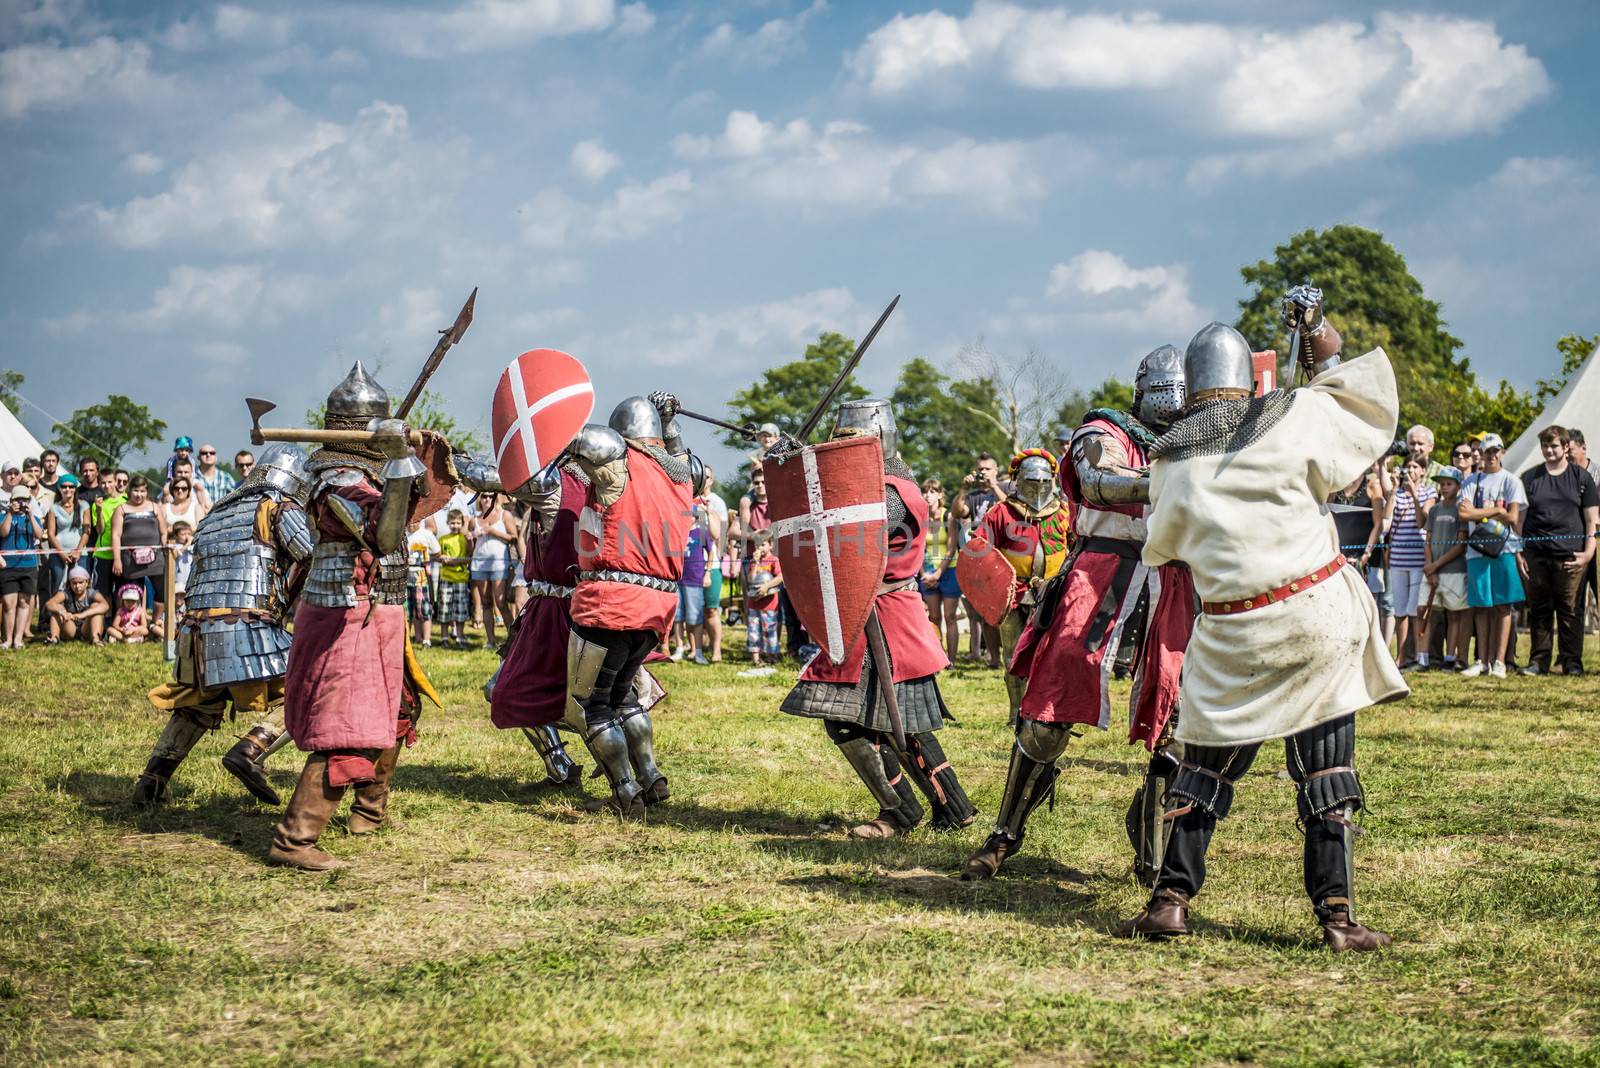 LIW, POLAND 17 AUGUST: Members of Medieval Reinactment Order fight in Liw Tournament on 17 August 2013 in Liw, Poland